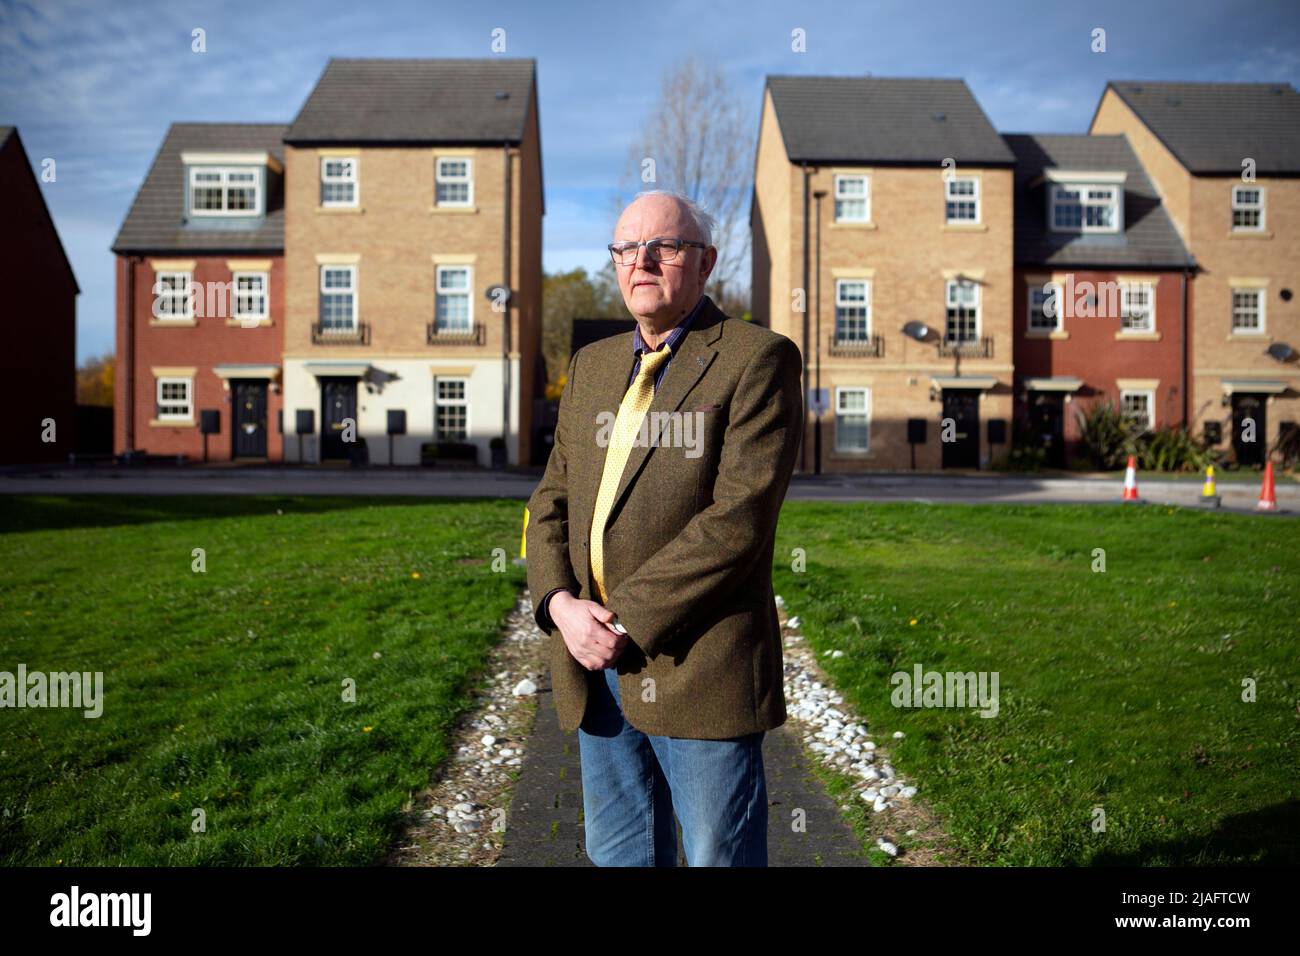 Andrew Pickering, Ward Councillor for Mexborough photographed on the Shimmer Housing Estate in the town of Mexborough near Doncaster in south Yorkshir Stock Photo